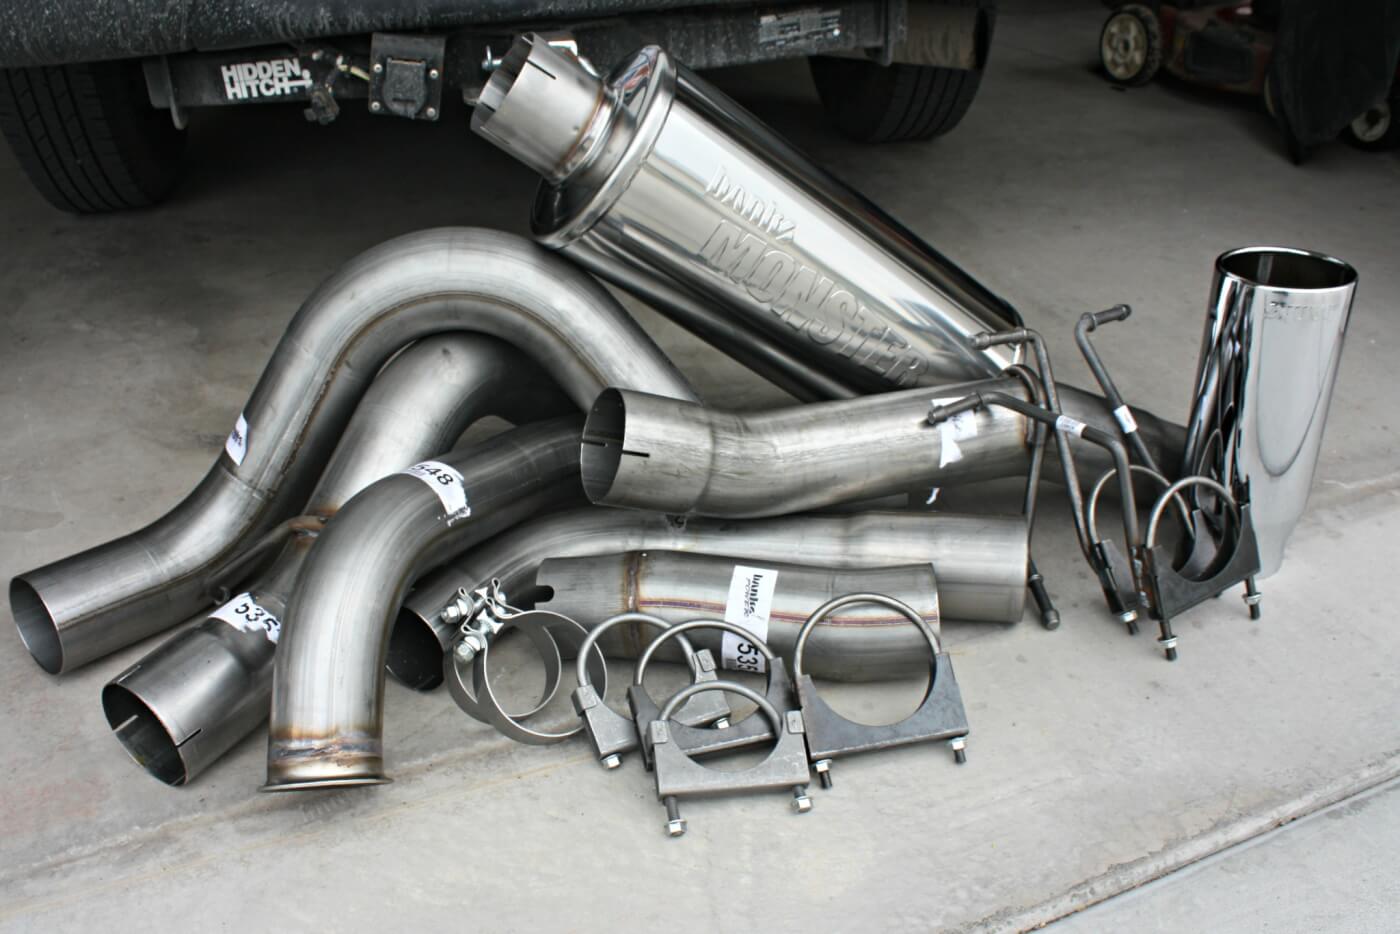 5. The Banks 4” Monster Exhaust system offers OEM fitment with high-quality hangers, clamps, and a large flow through muffler to maximize exhaust flow and sound without giving off that loud, obnoxious in-cab drone commonly heard with other aftermarket systems.